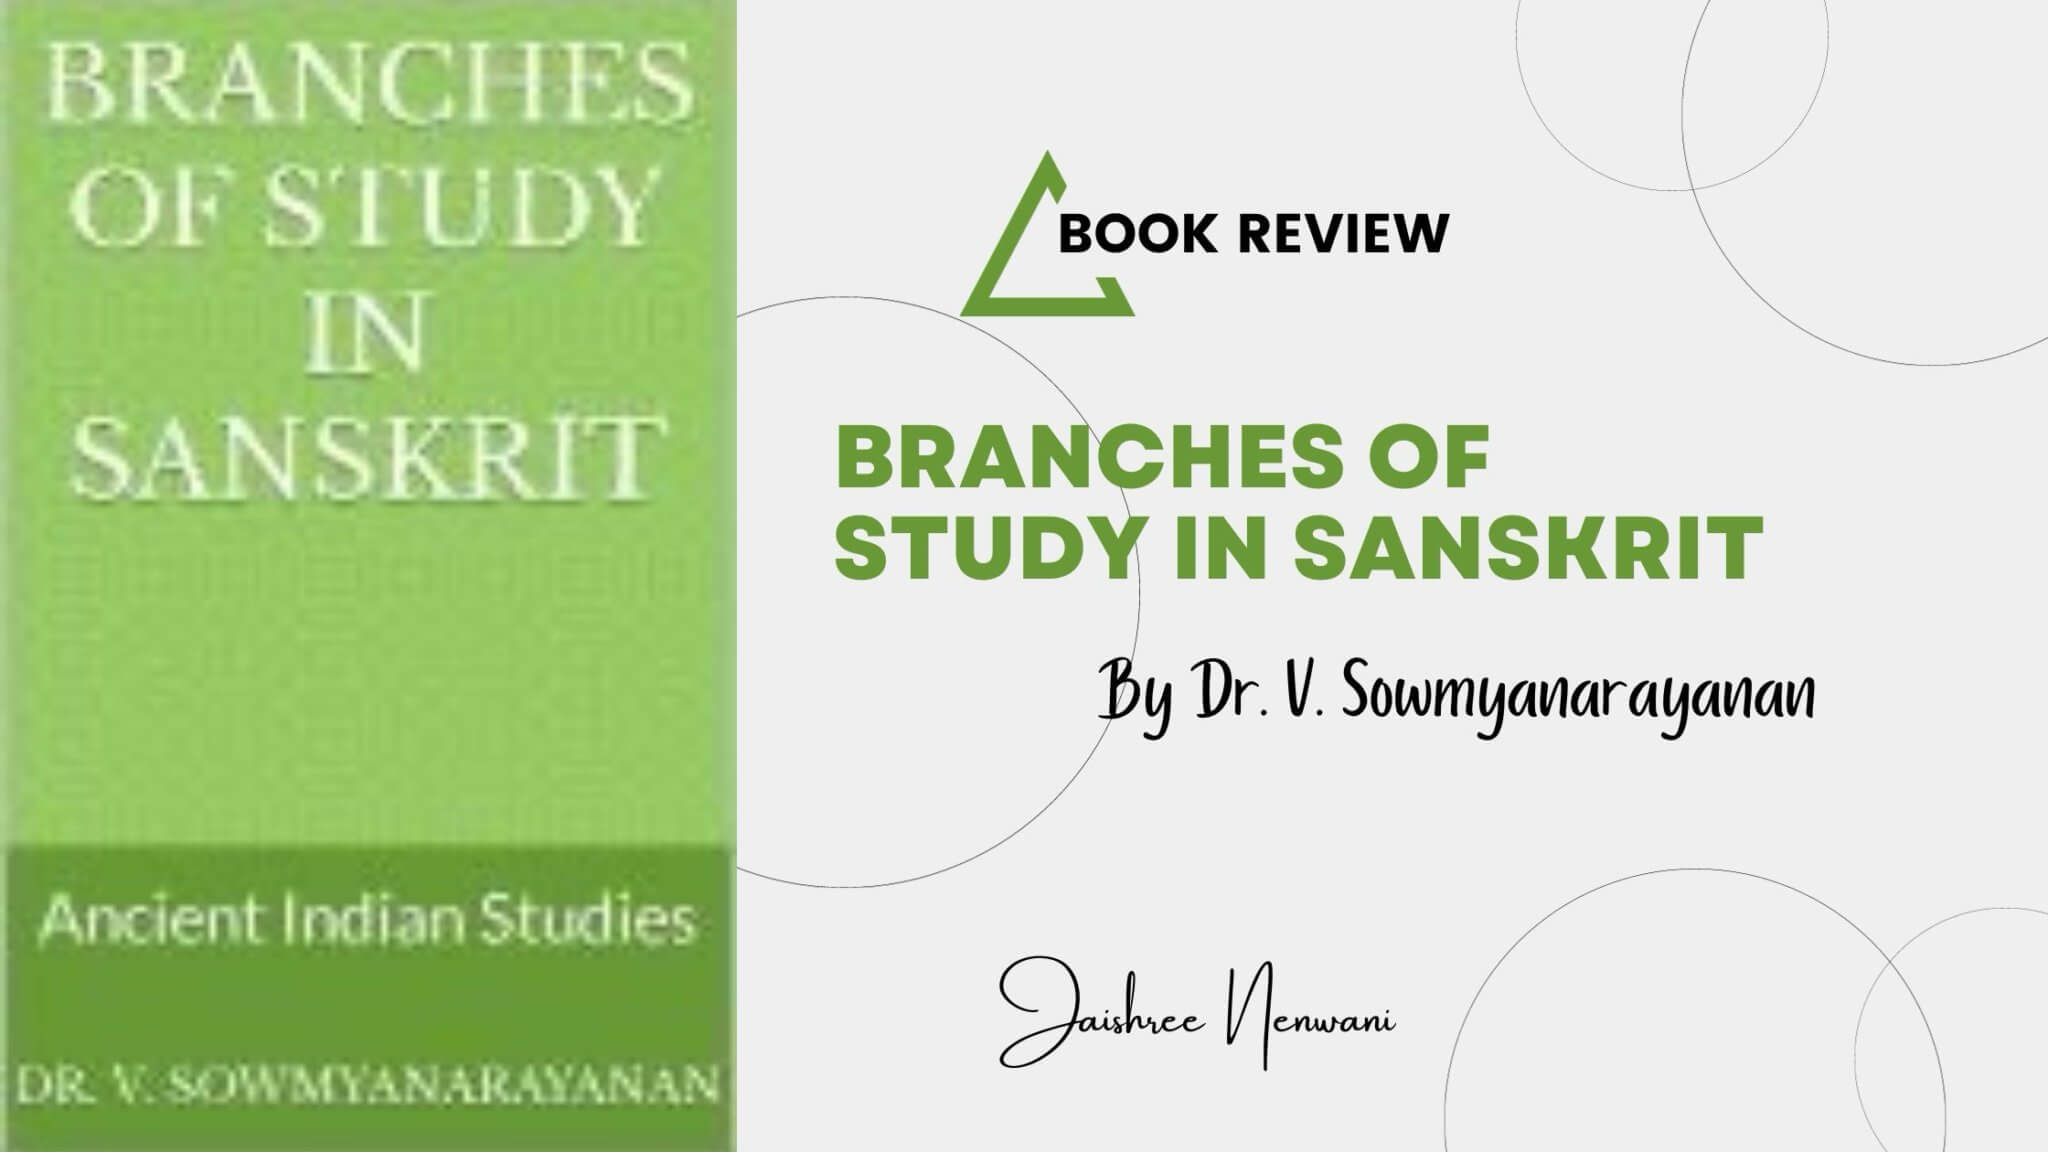 Branches of Study in Sanskrit